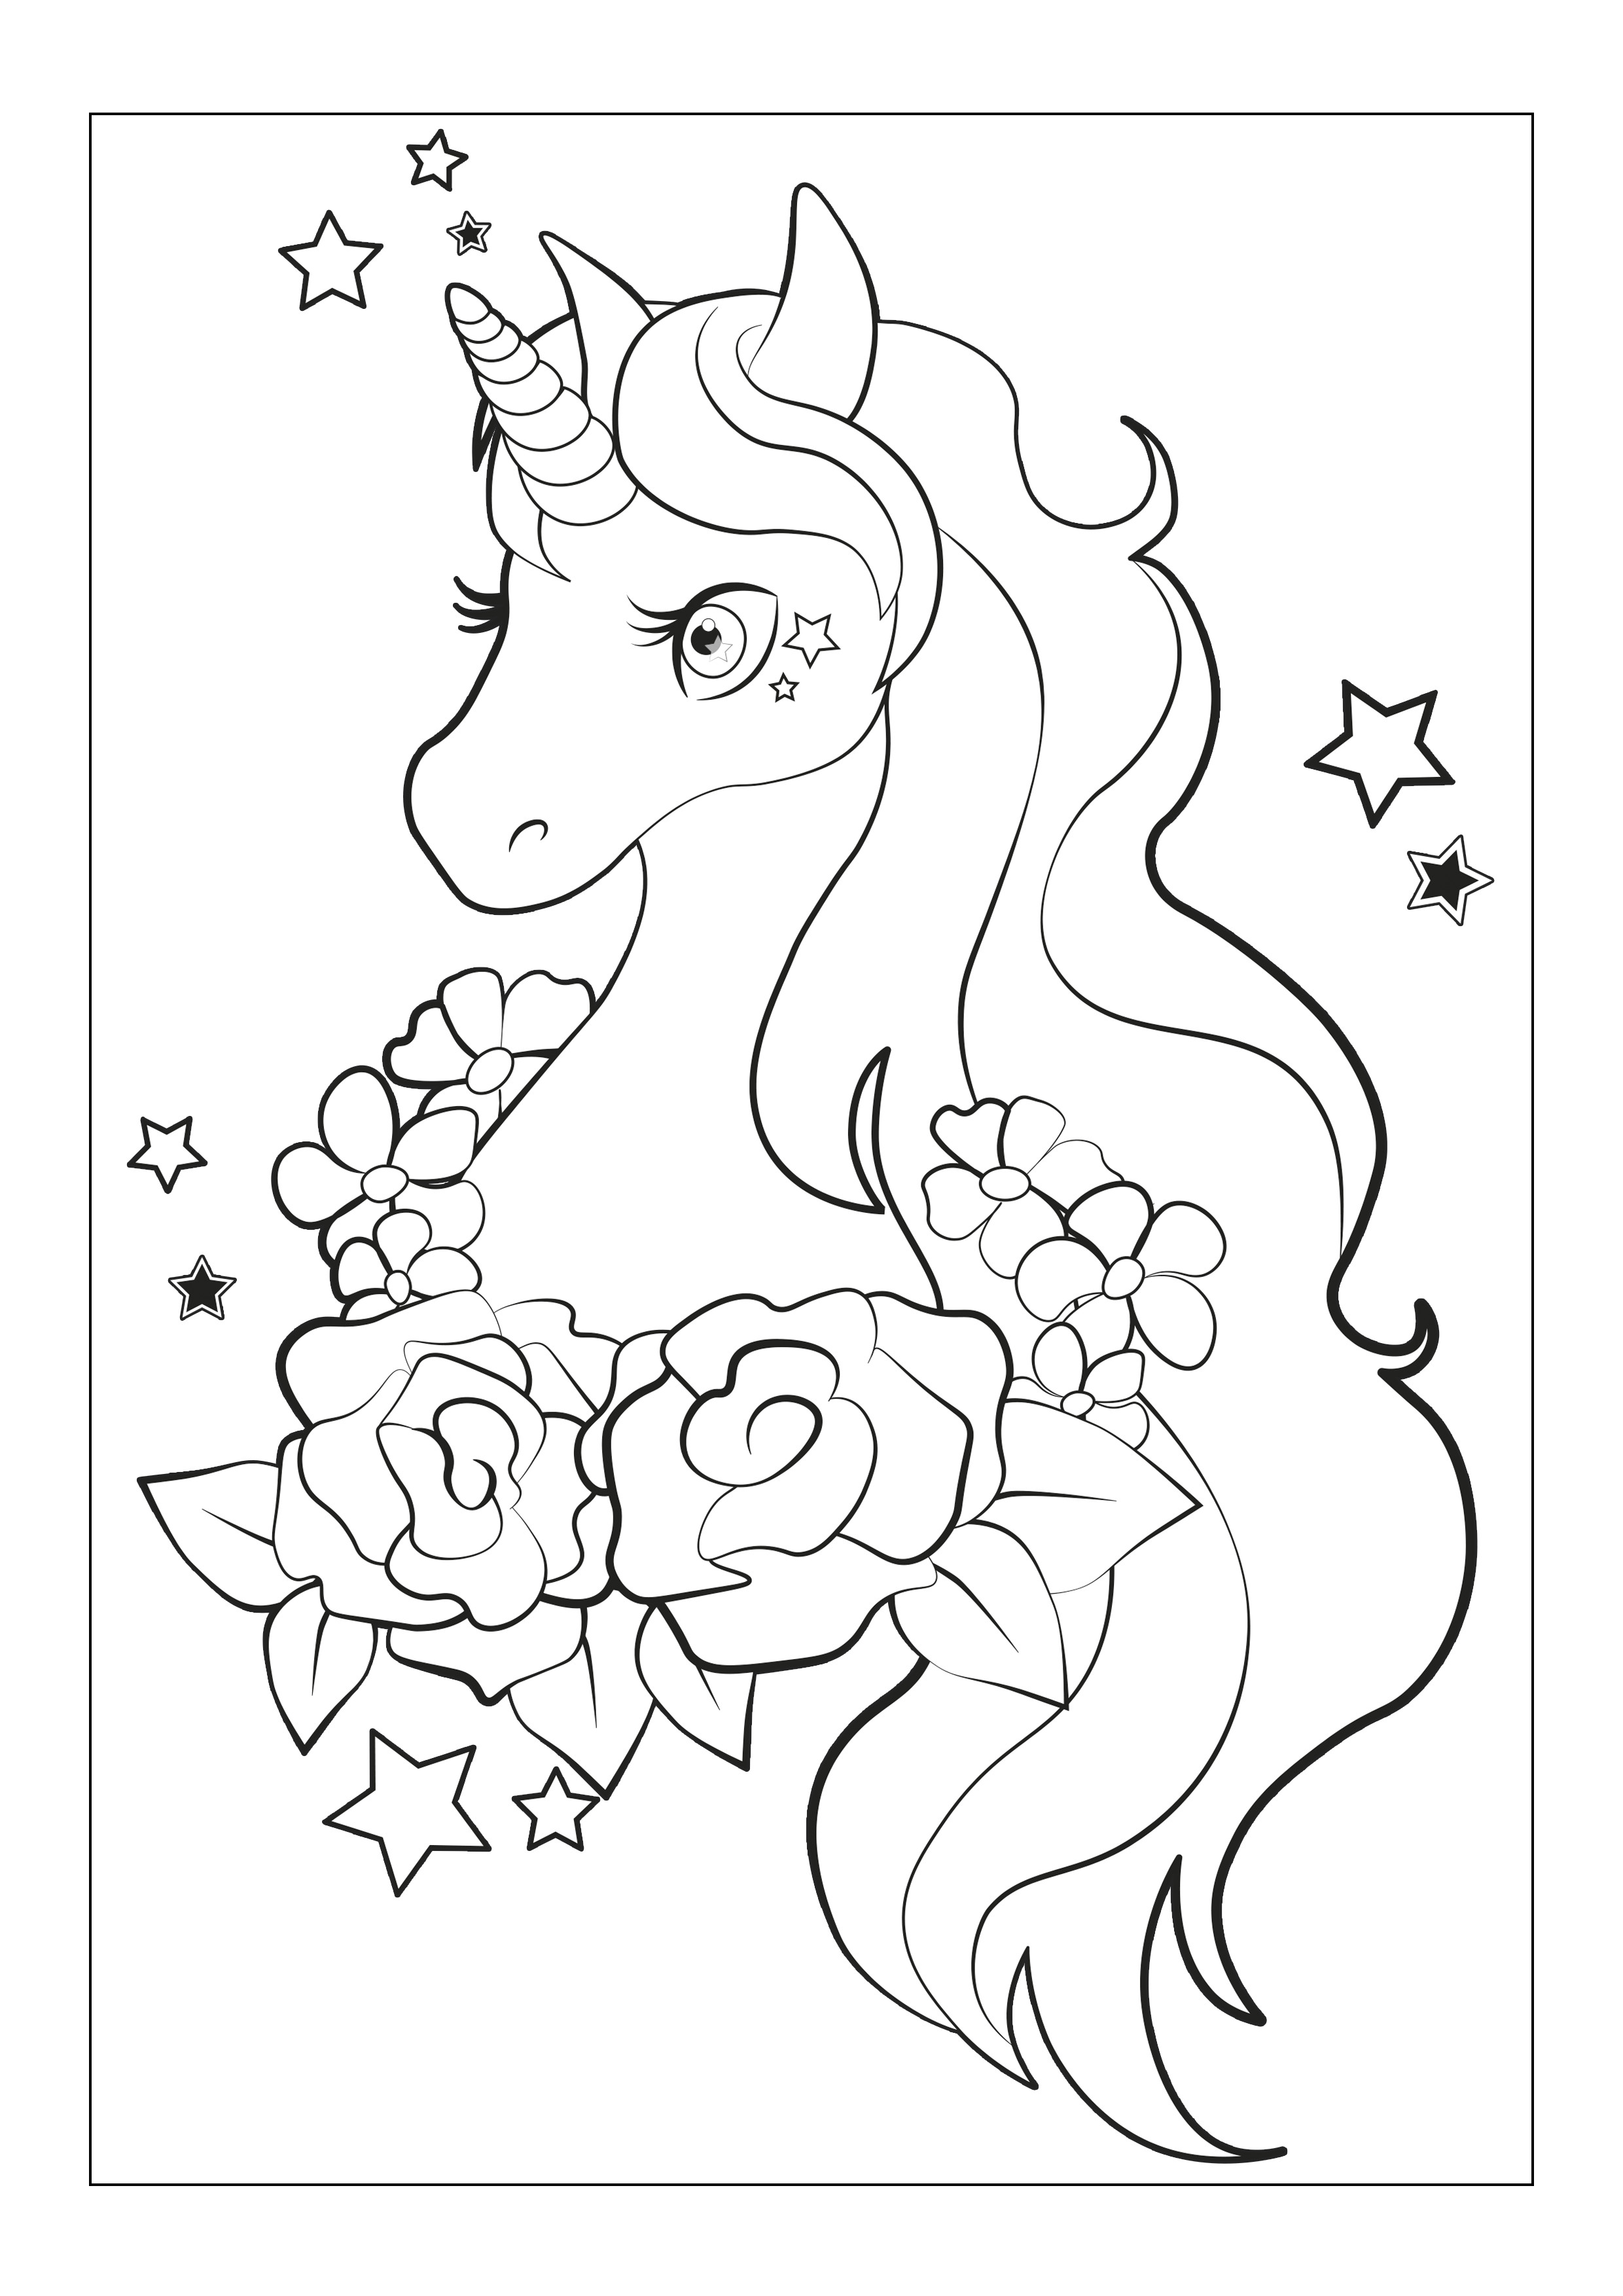 Free Coloring Pages Girls Printable
 The Best Free Coloring Pages For Girls